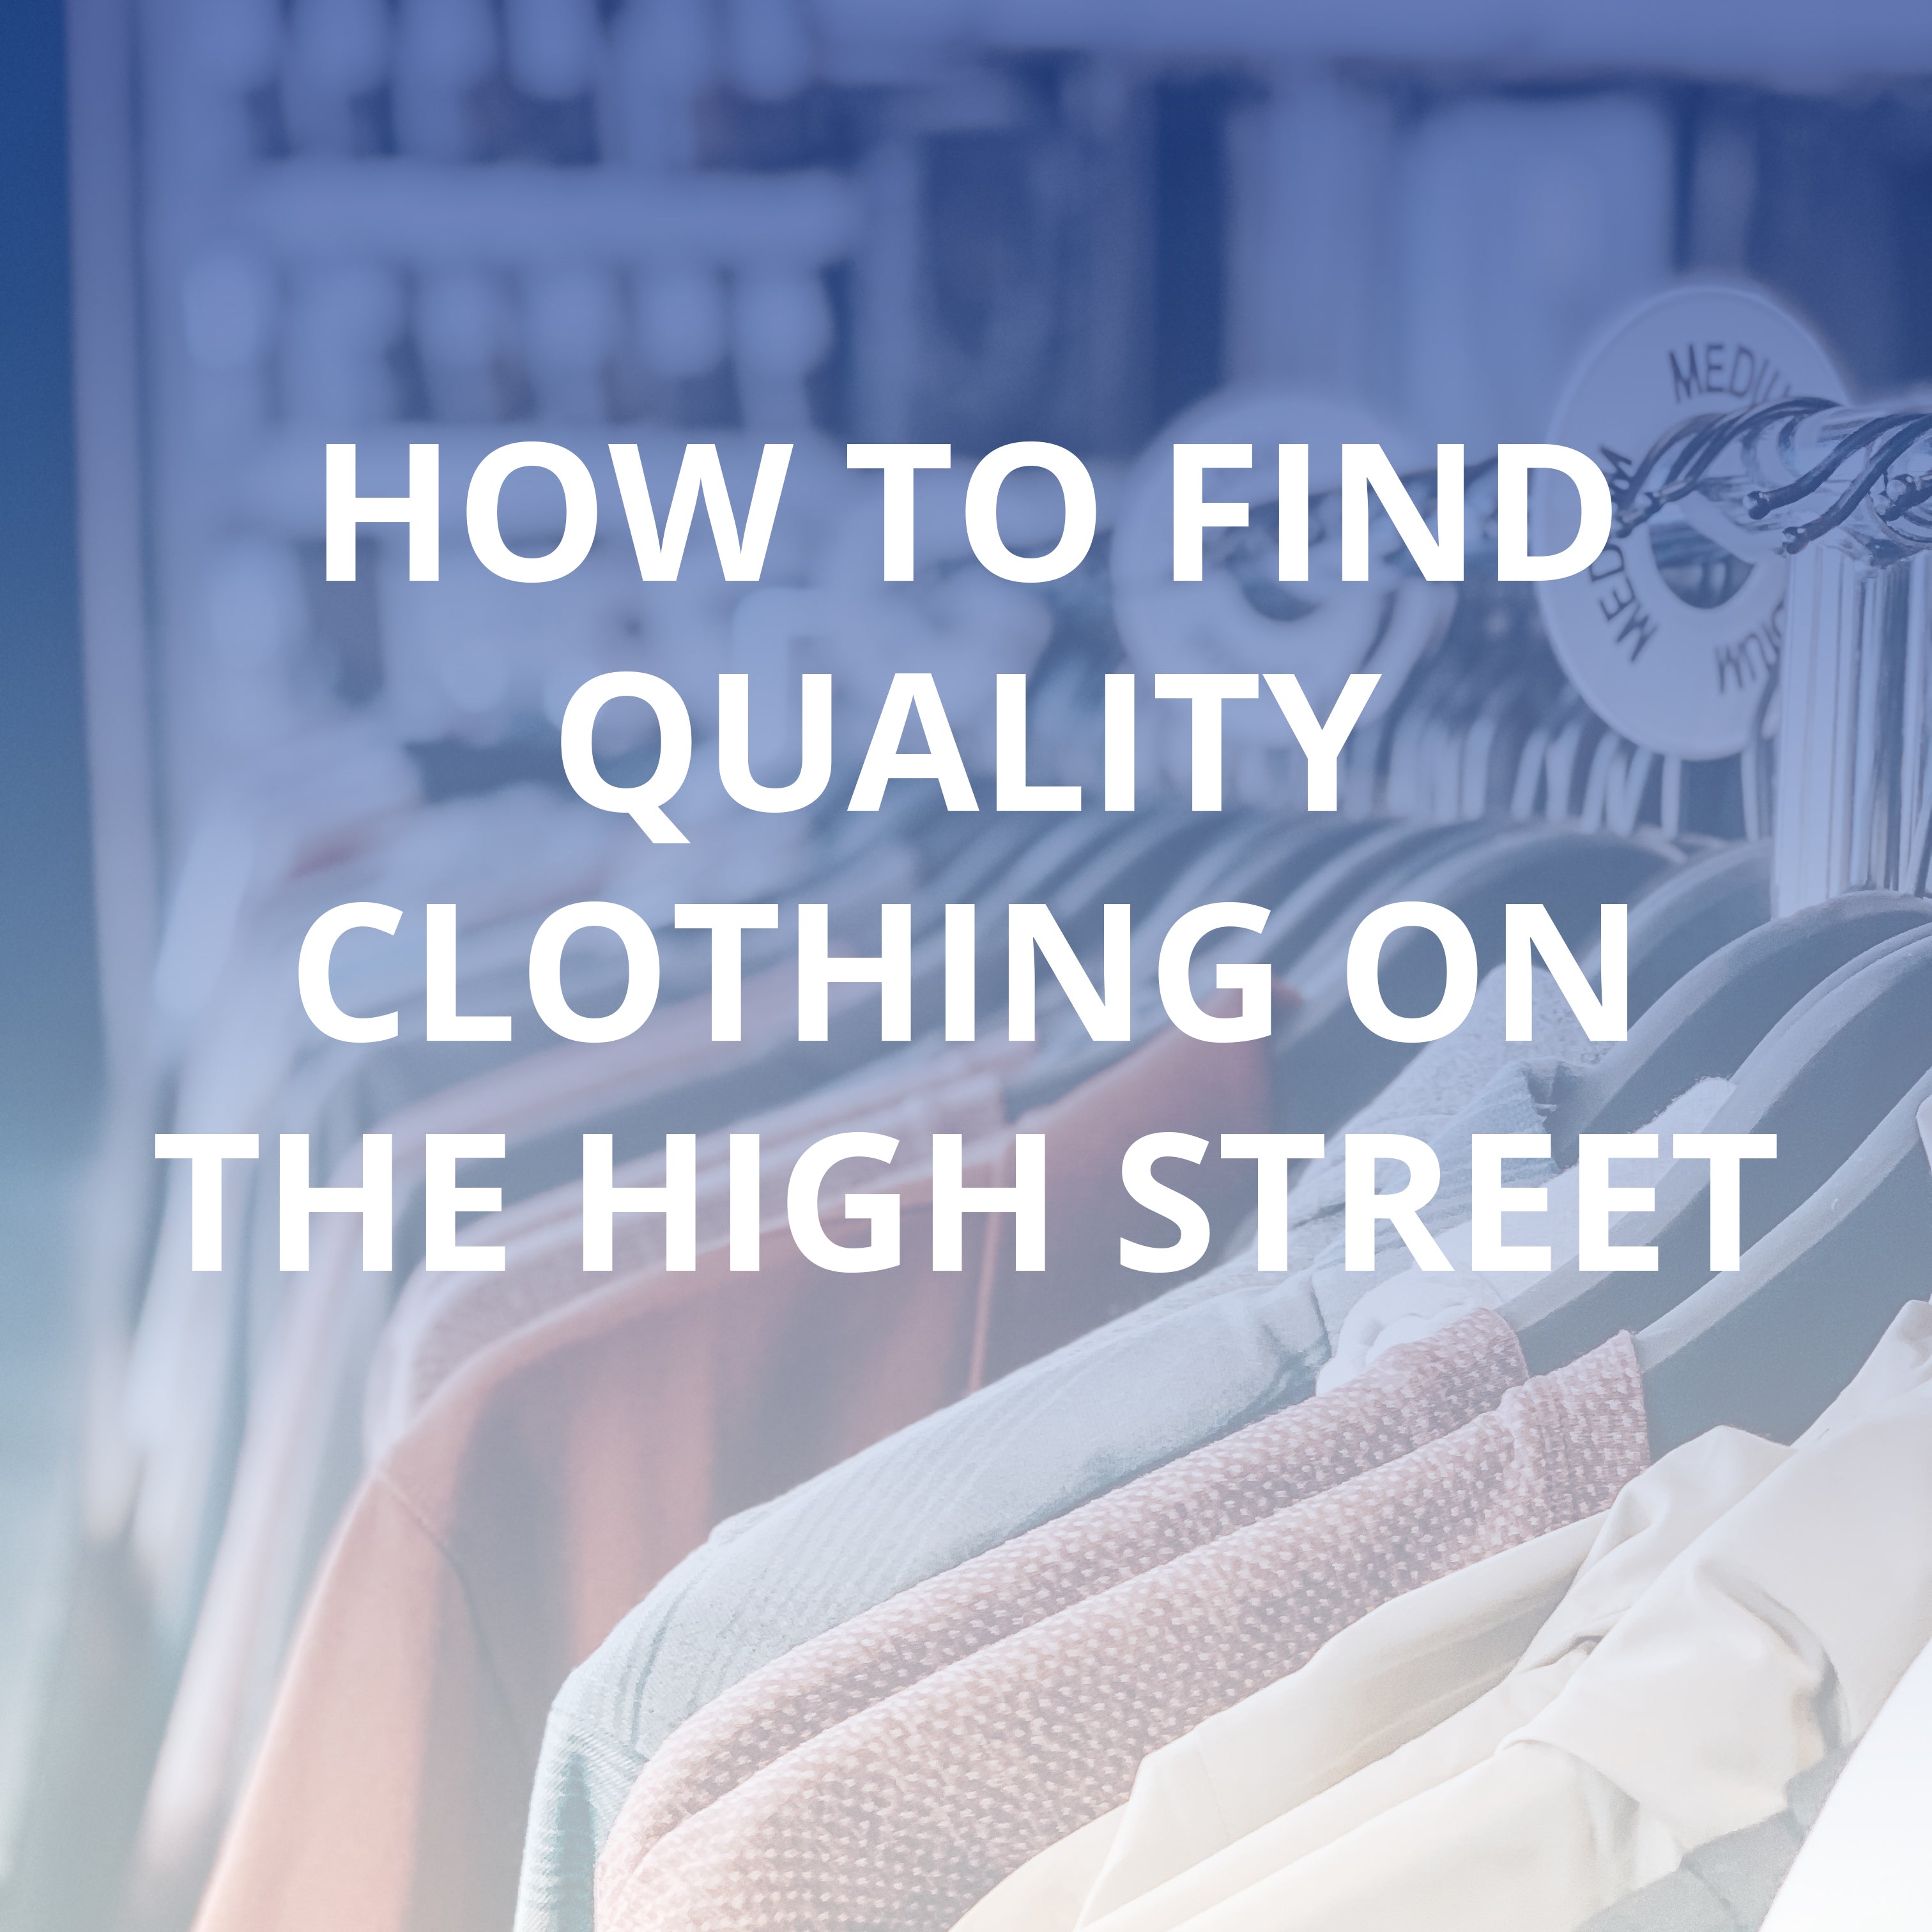 How to find quality clothing on the high street